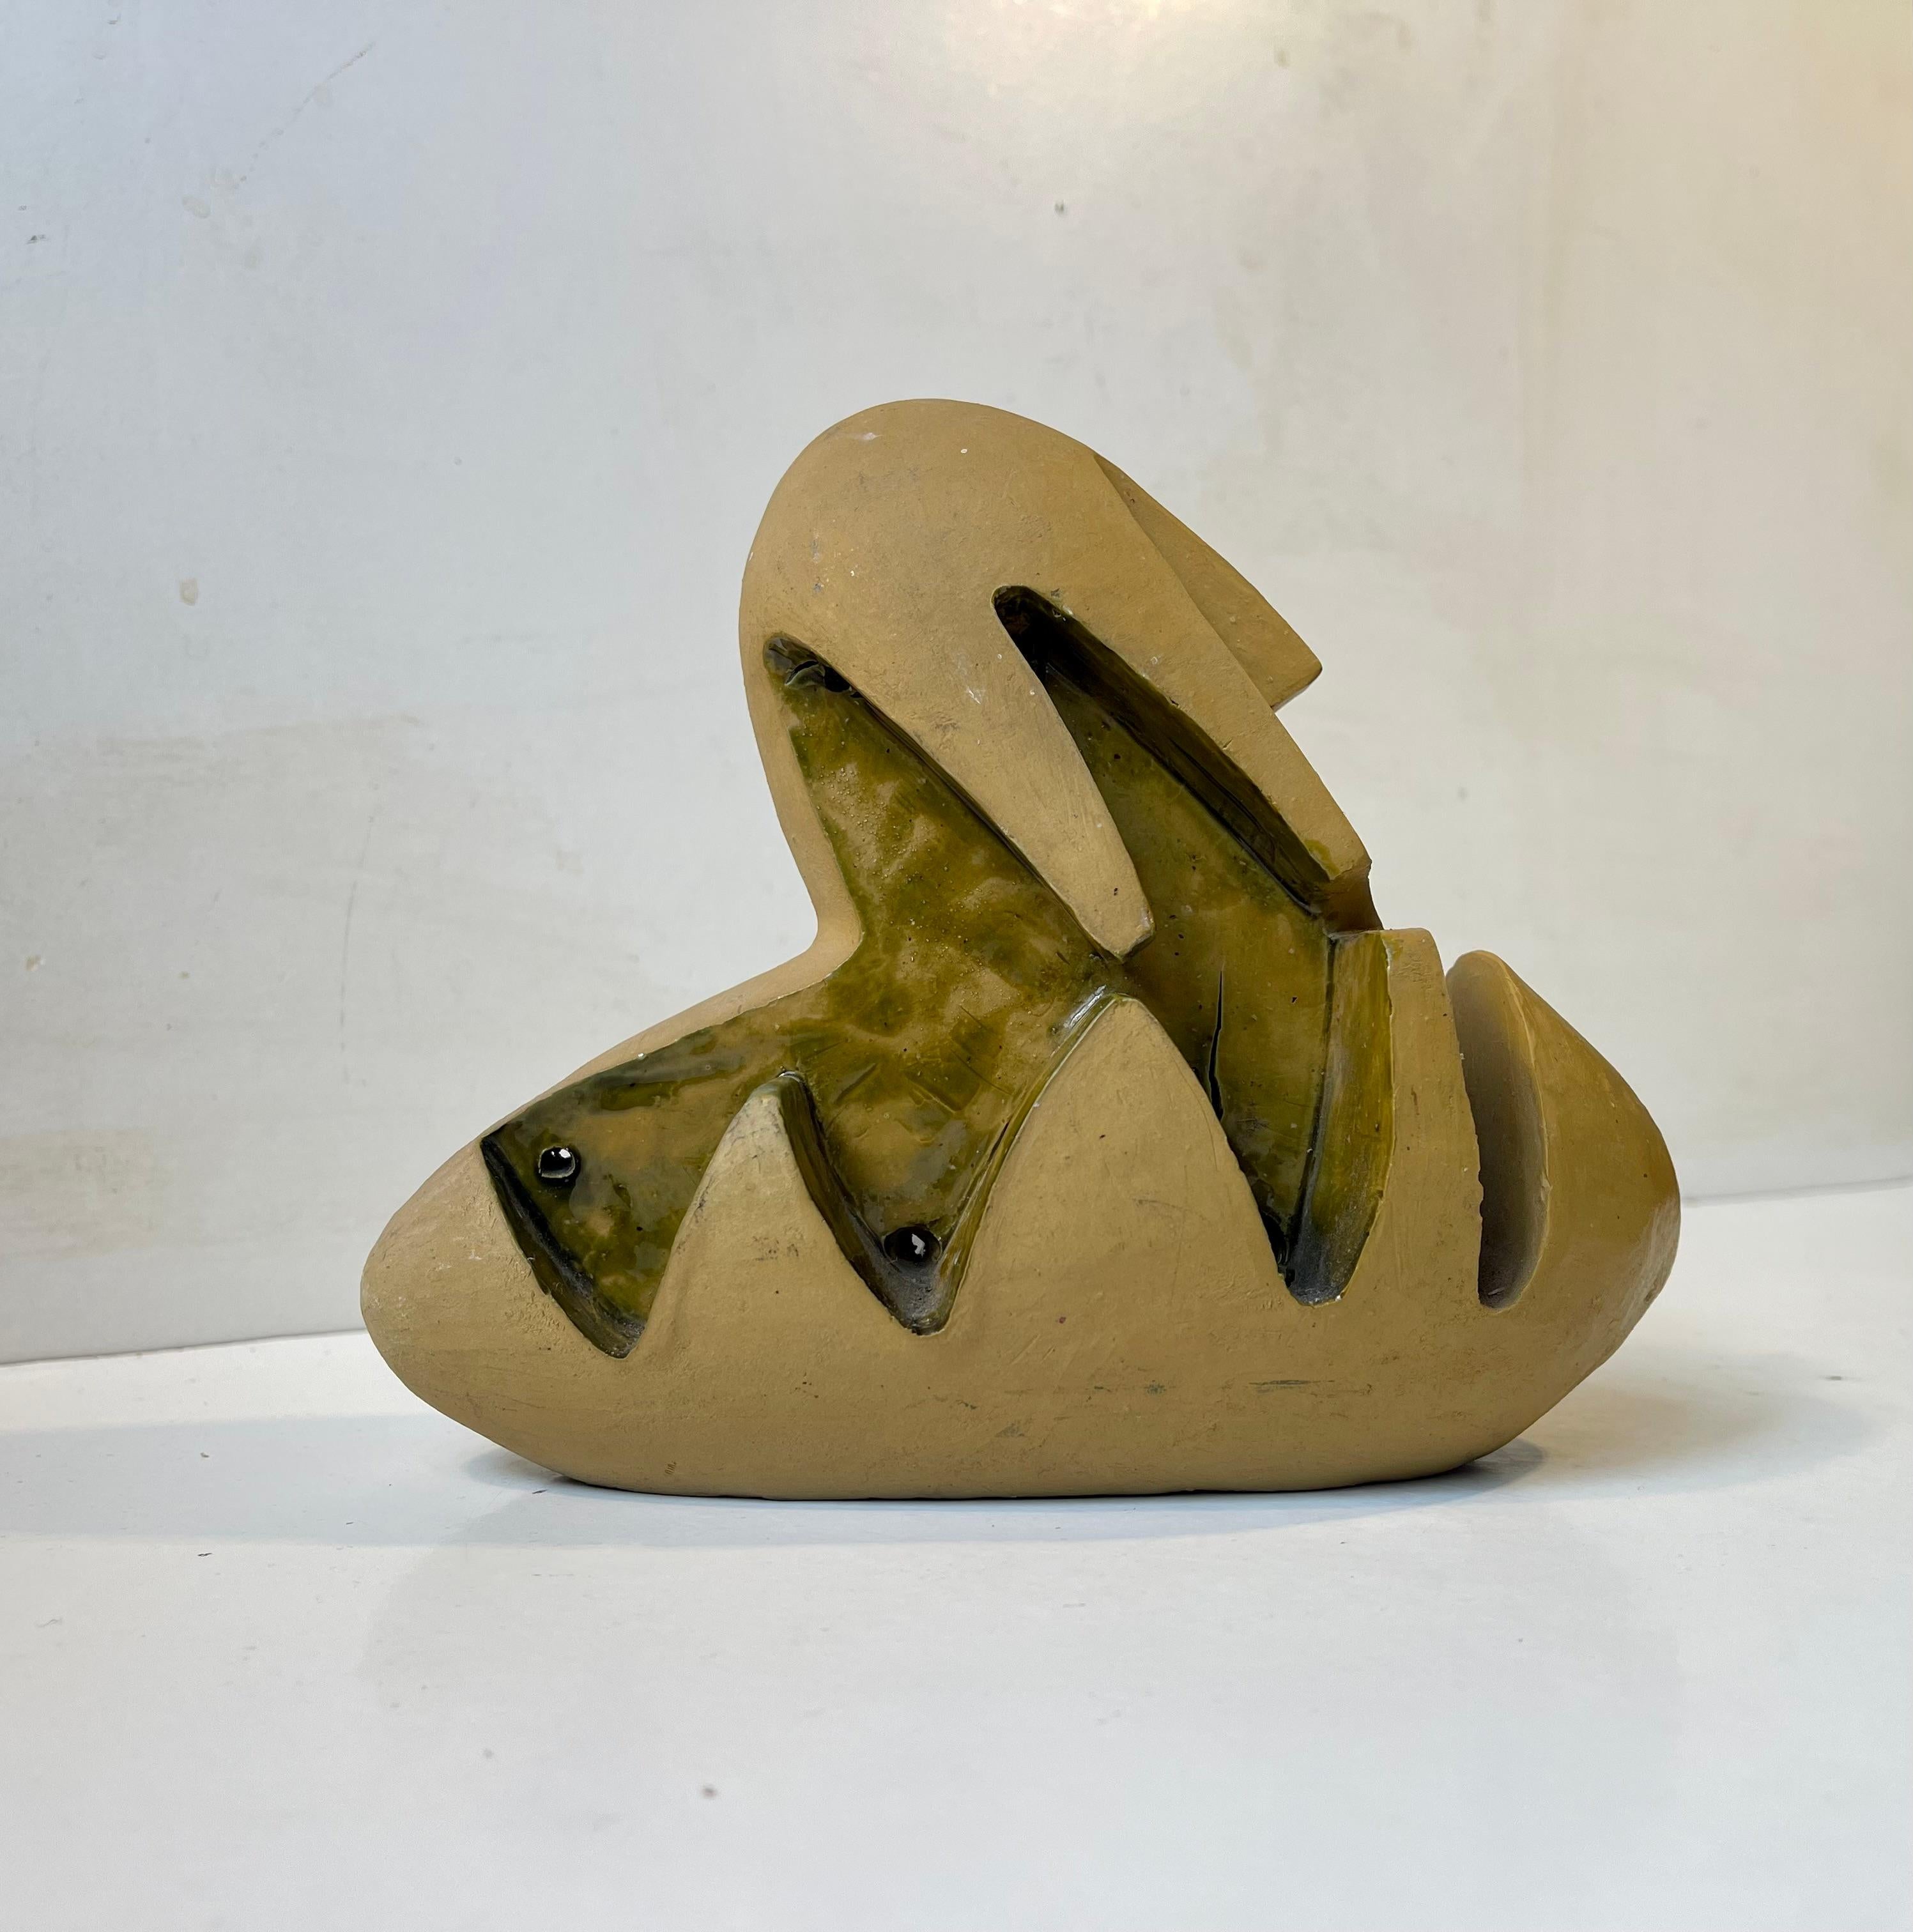 Abstract Form - Surrealist Entity in Glazed Ceramic, 1960s For Sale 2